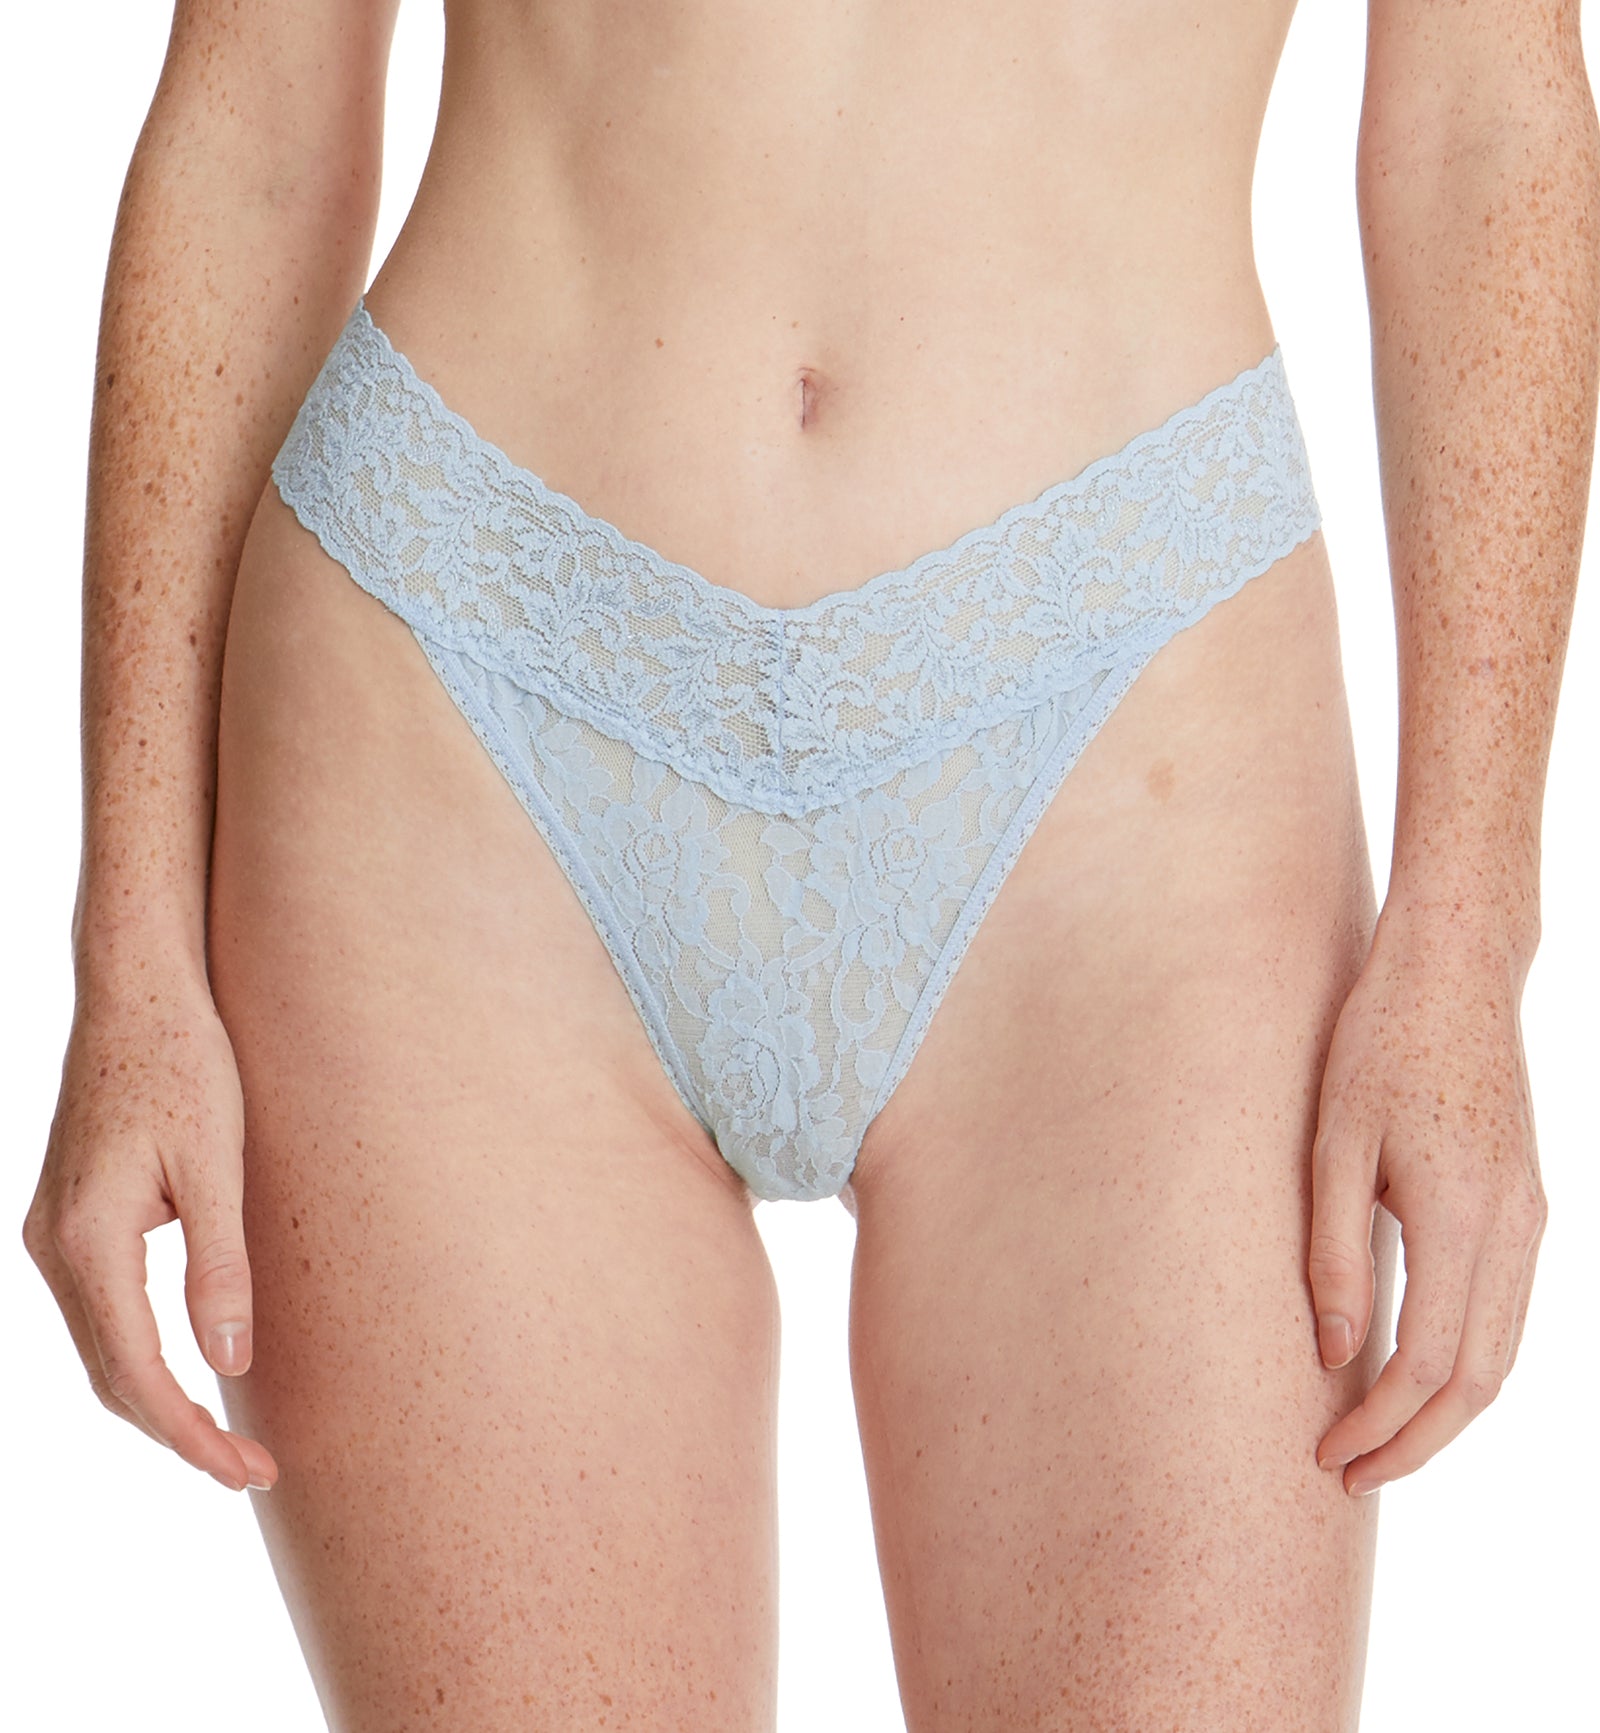 Hanky Panky Signature Lace Original Rise Thong (4811P),Partly Cloudy - Partly Cloudy,One Size